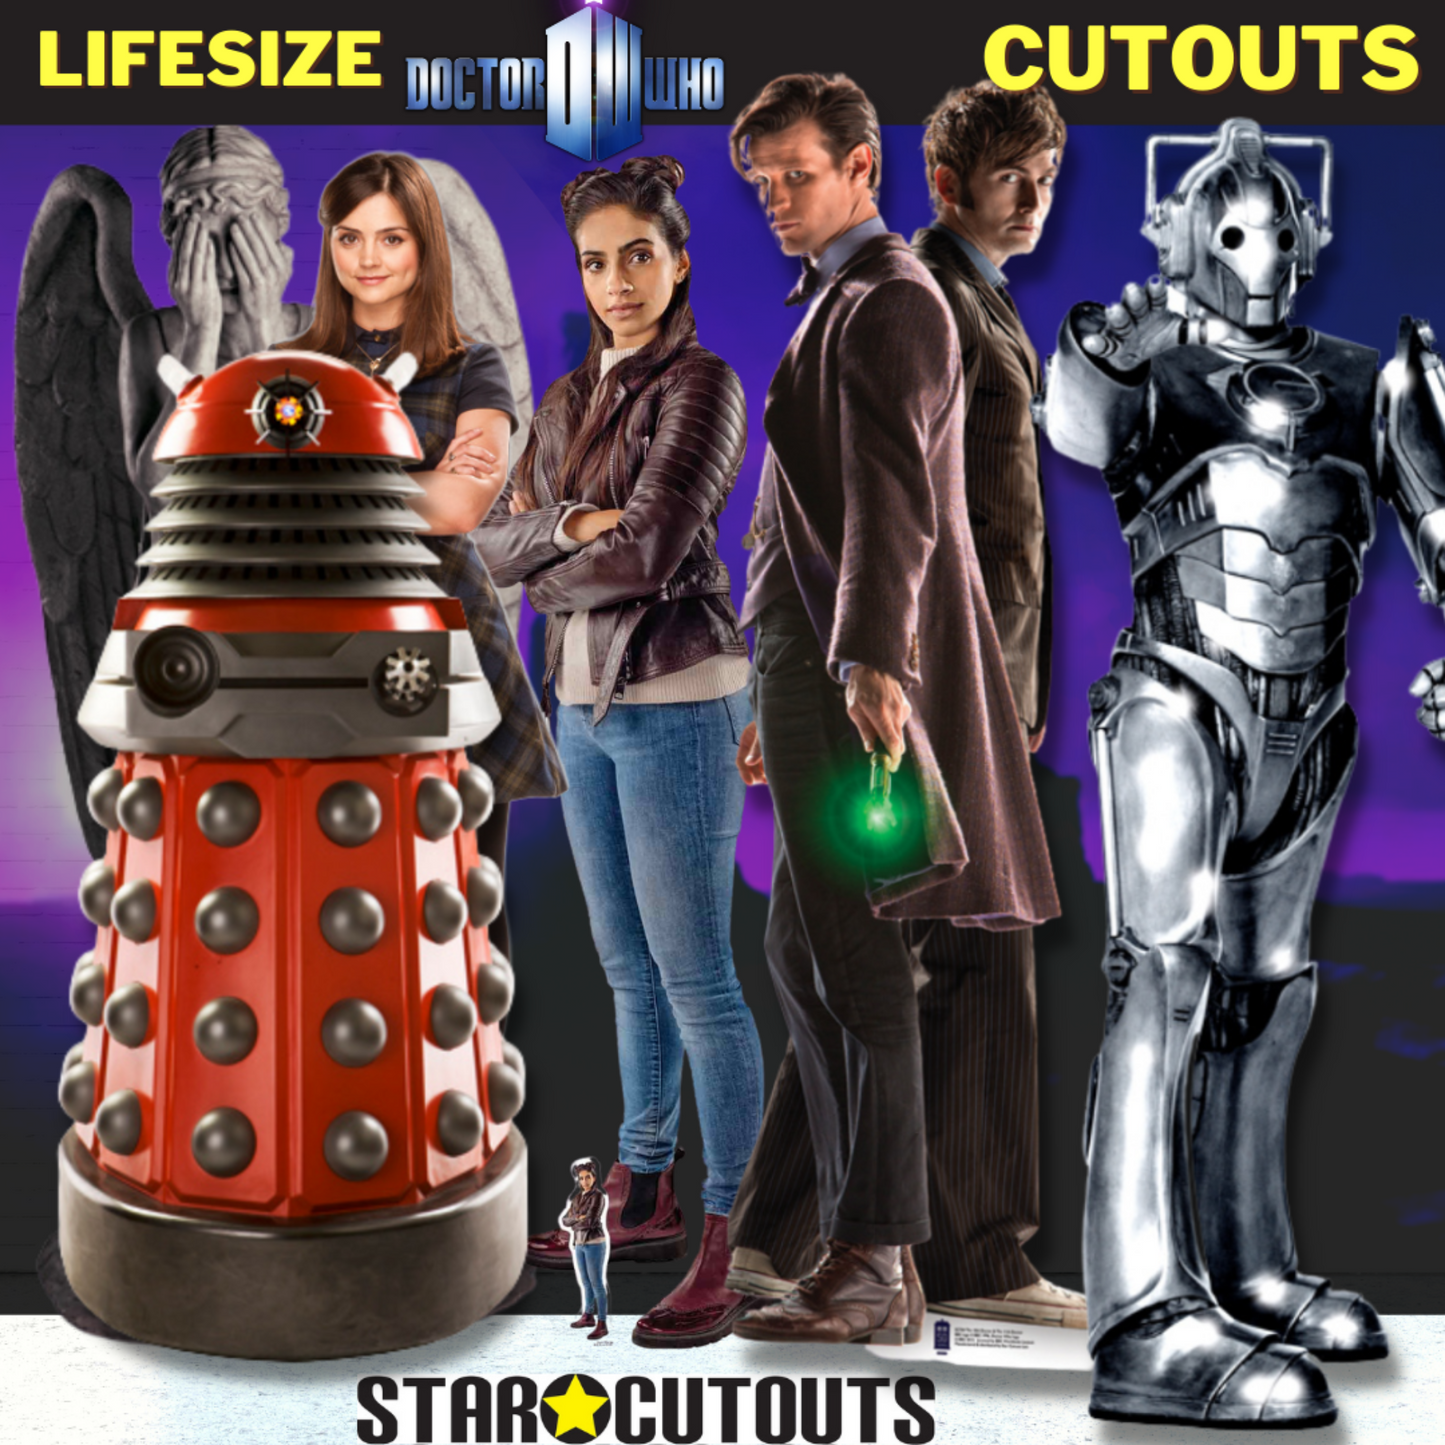 13th Doctor Who The Tardis Two Thirds Life Size Iconic Time Travel Cardboard Cut Out Height 195cm